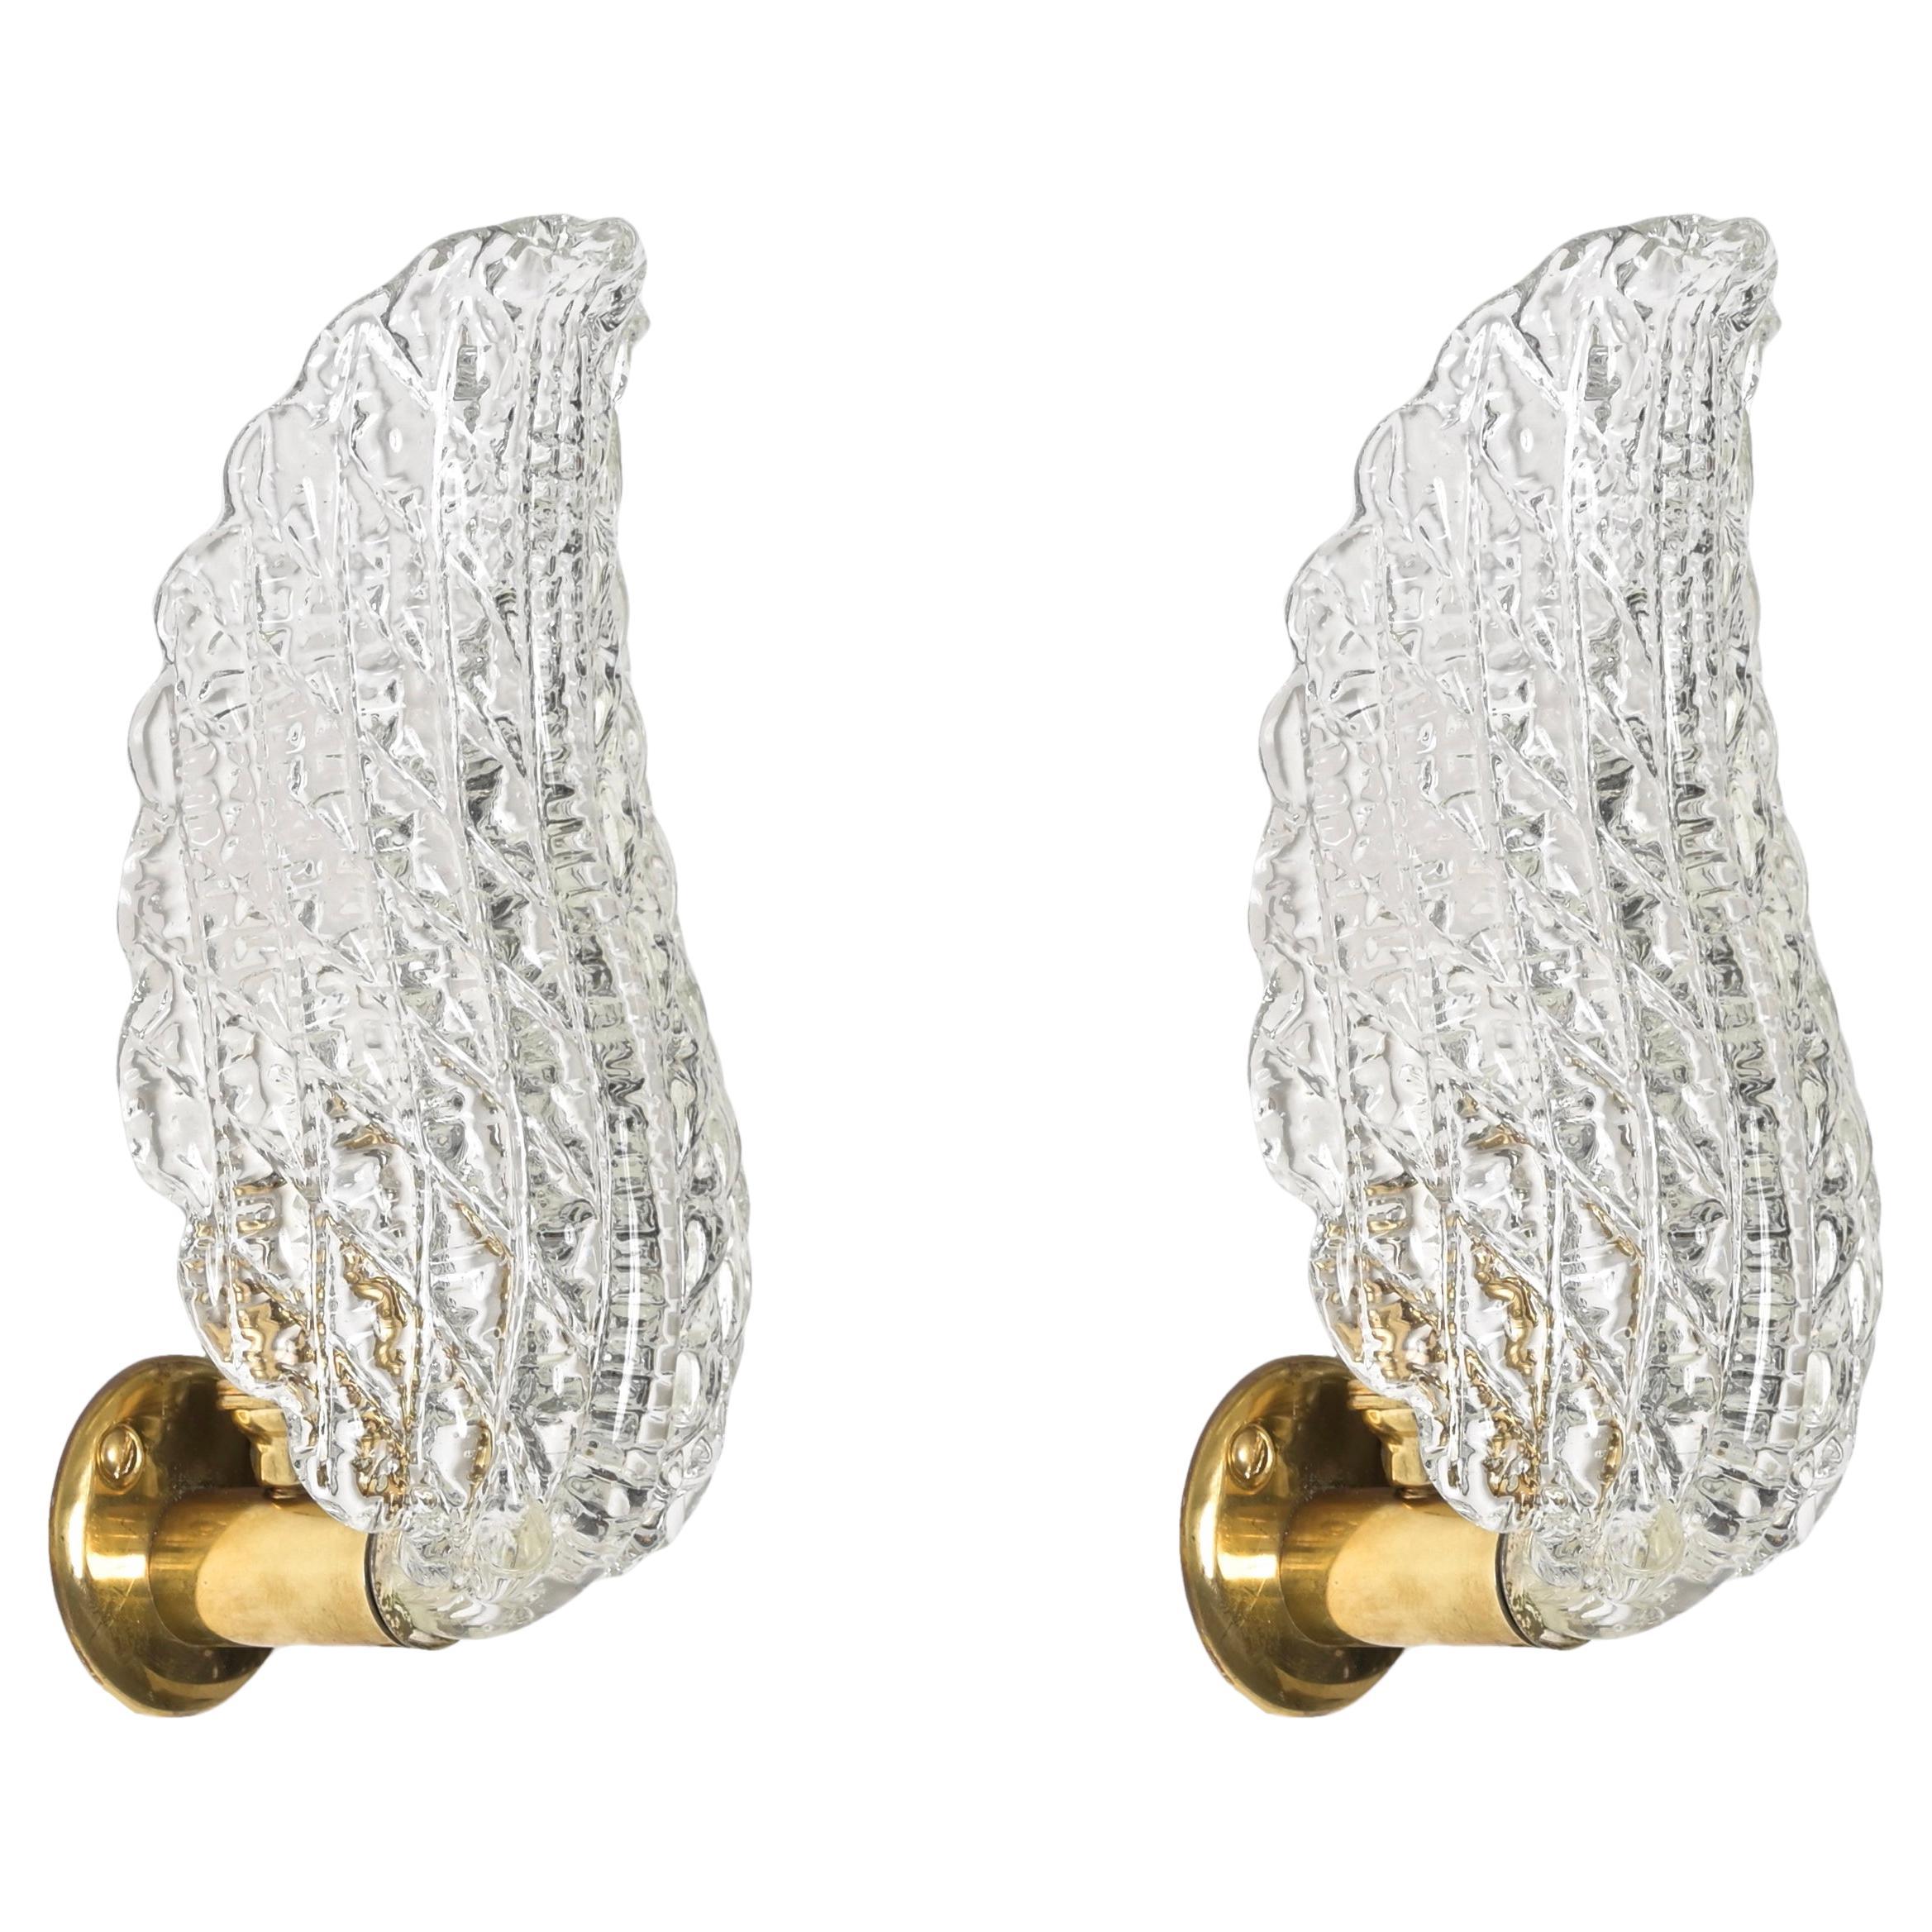 Pair of Midcentury Murano Glass and Brass Leaf Sconces, by Barovier, Italy 1950s